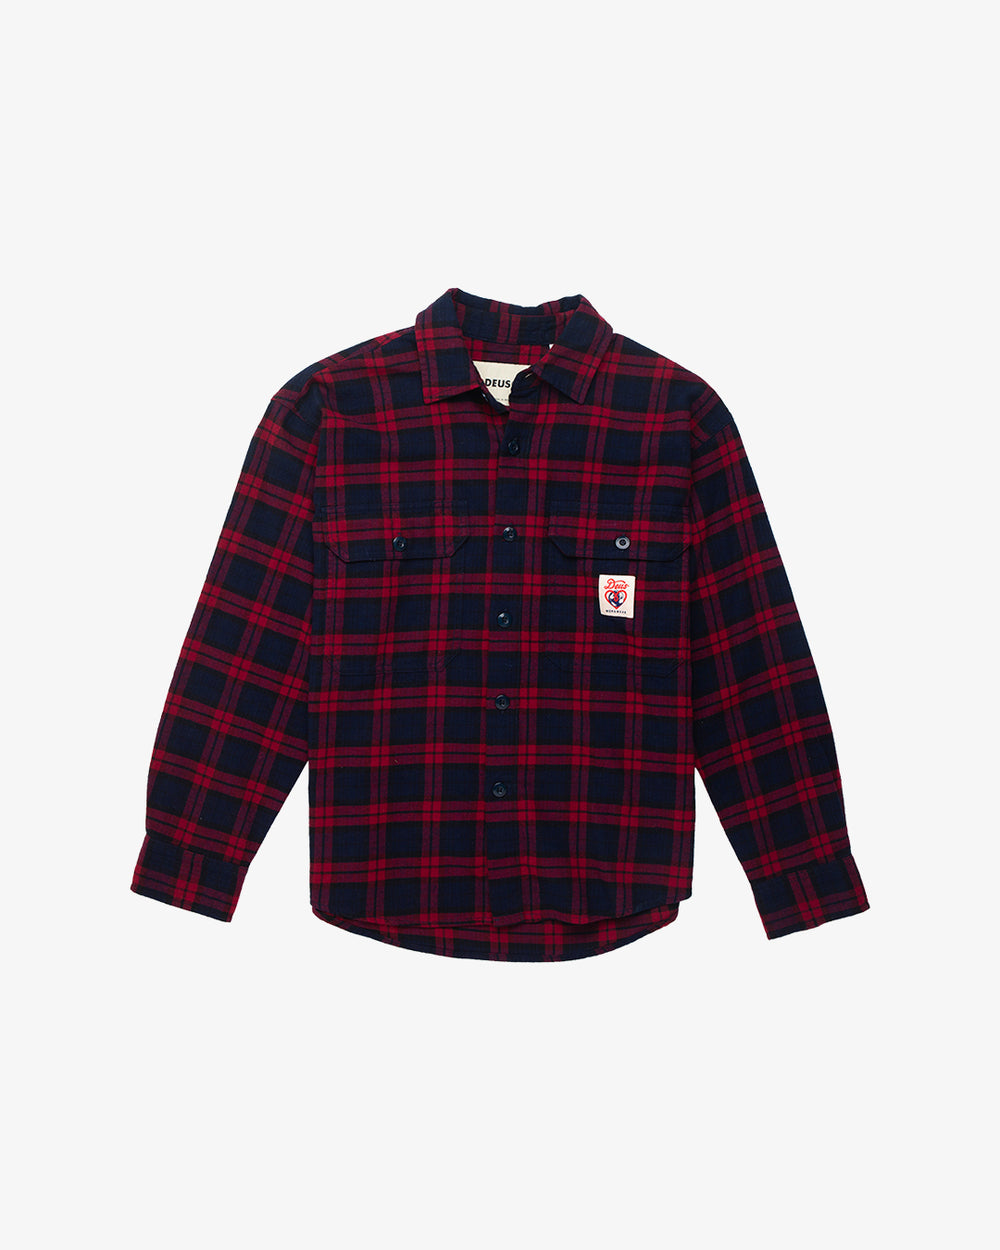 Flannel Check Shirt Red Check Woman